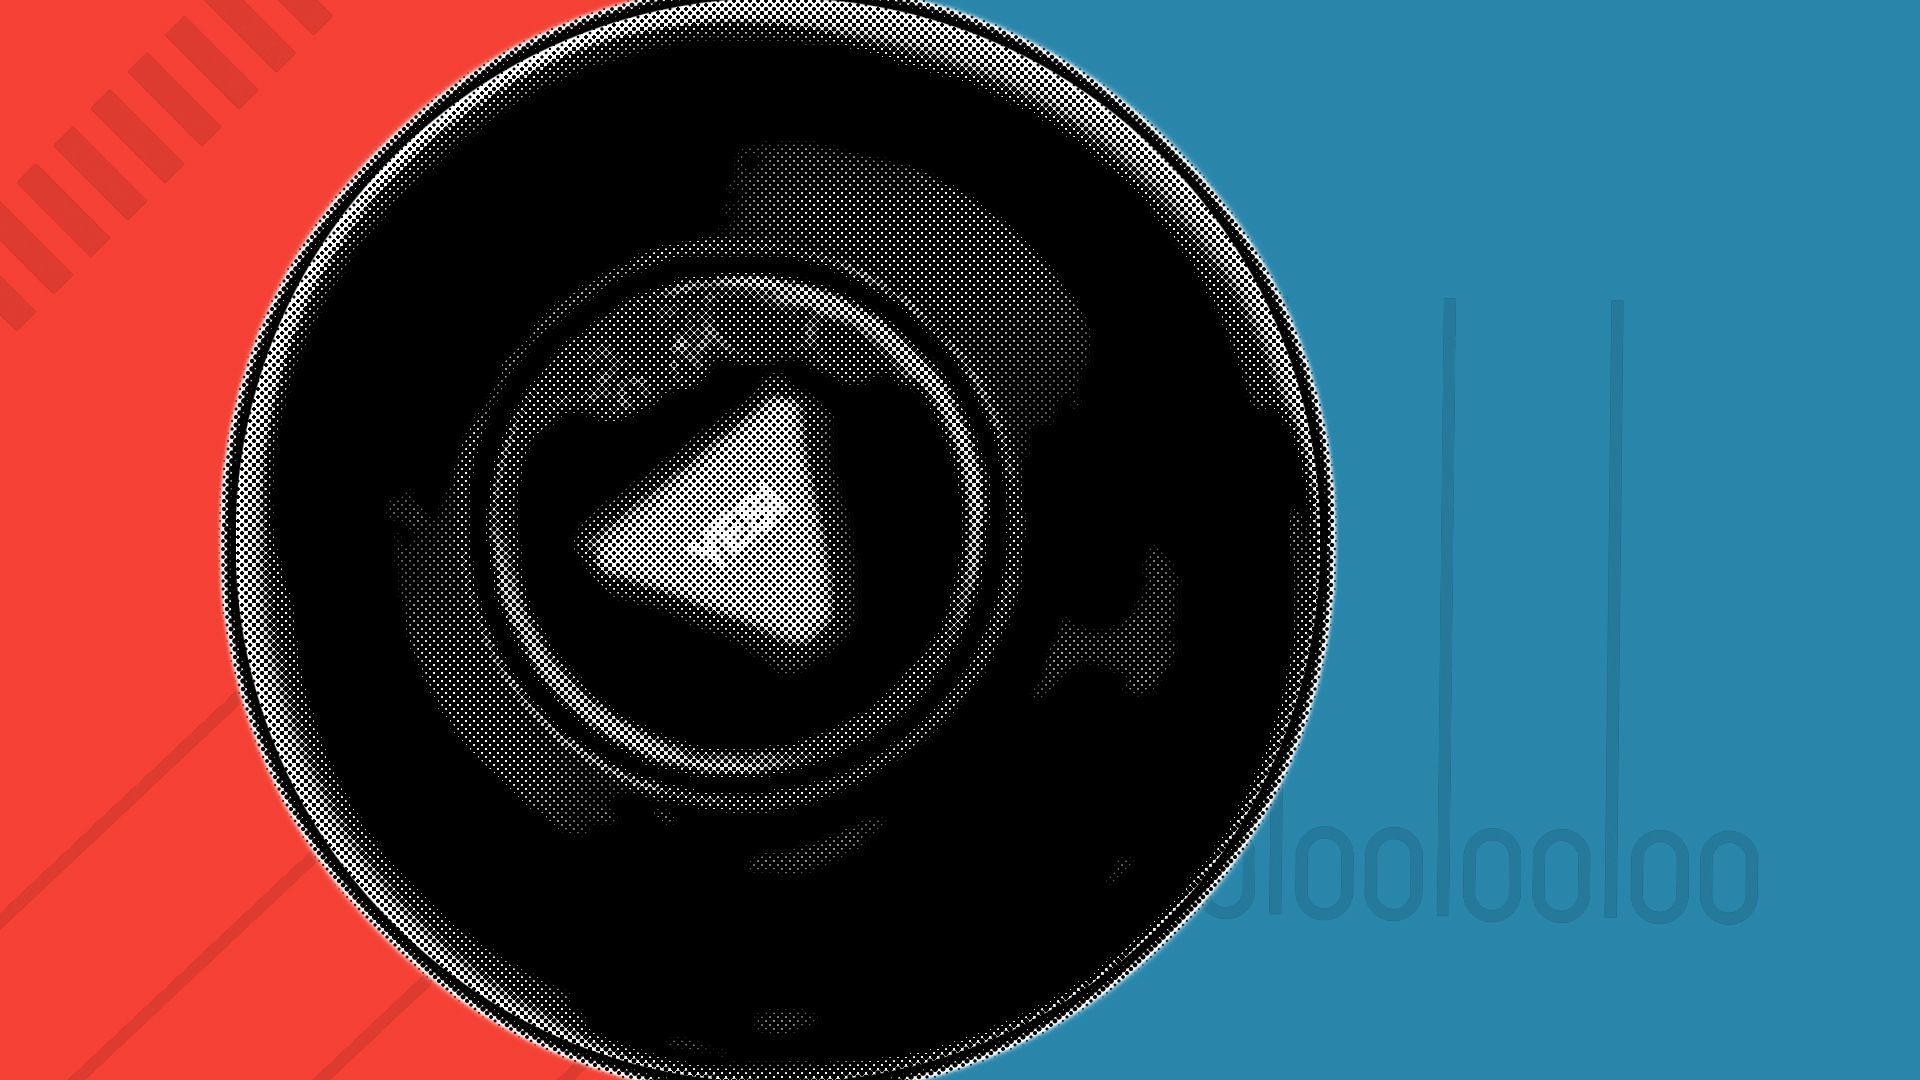 Illustration of a magic eight ball revealing the word "YES!" 